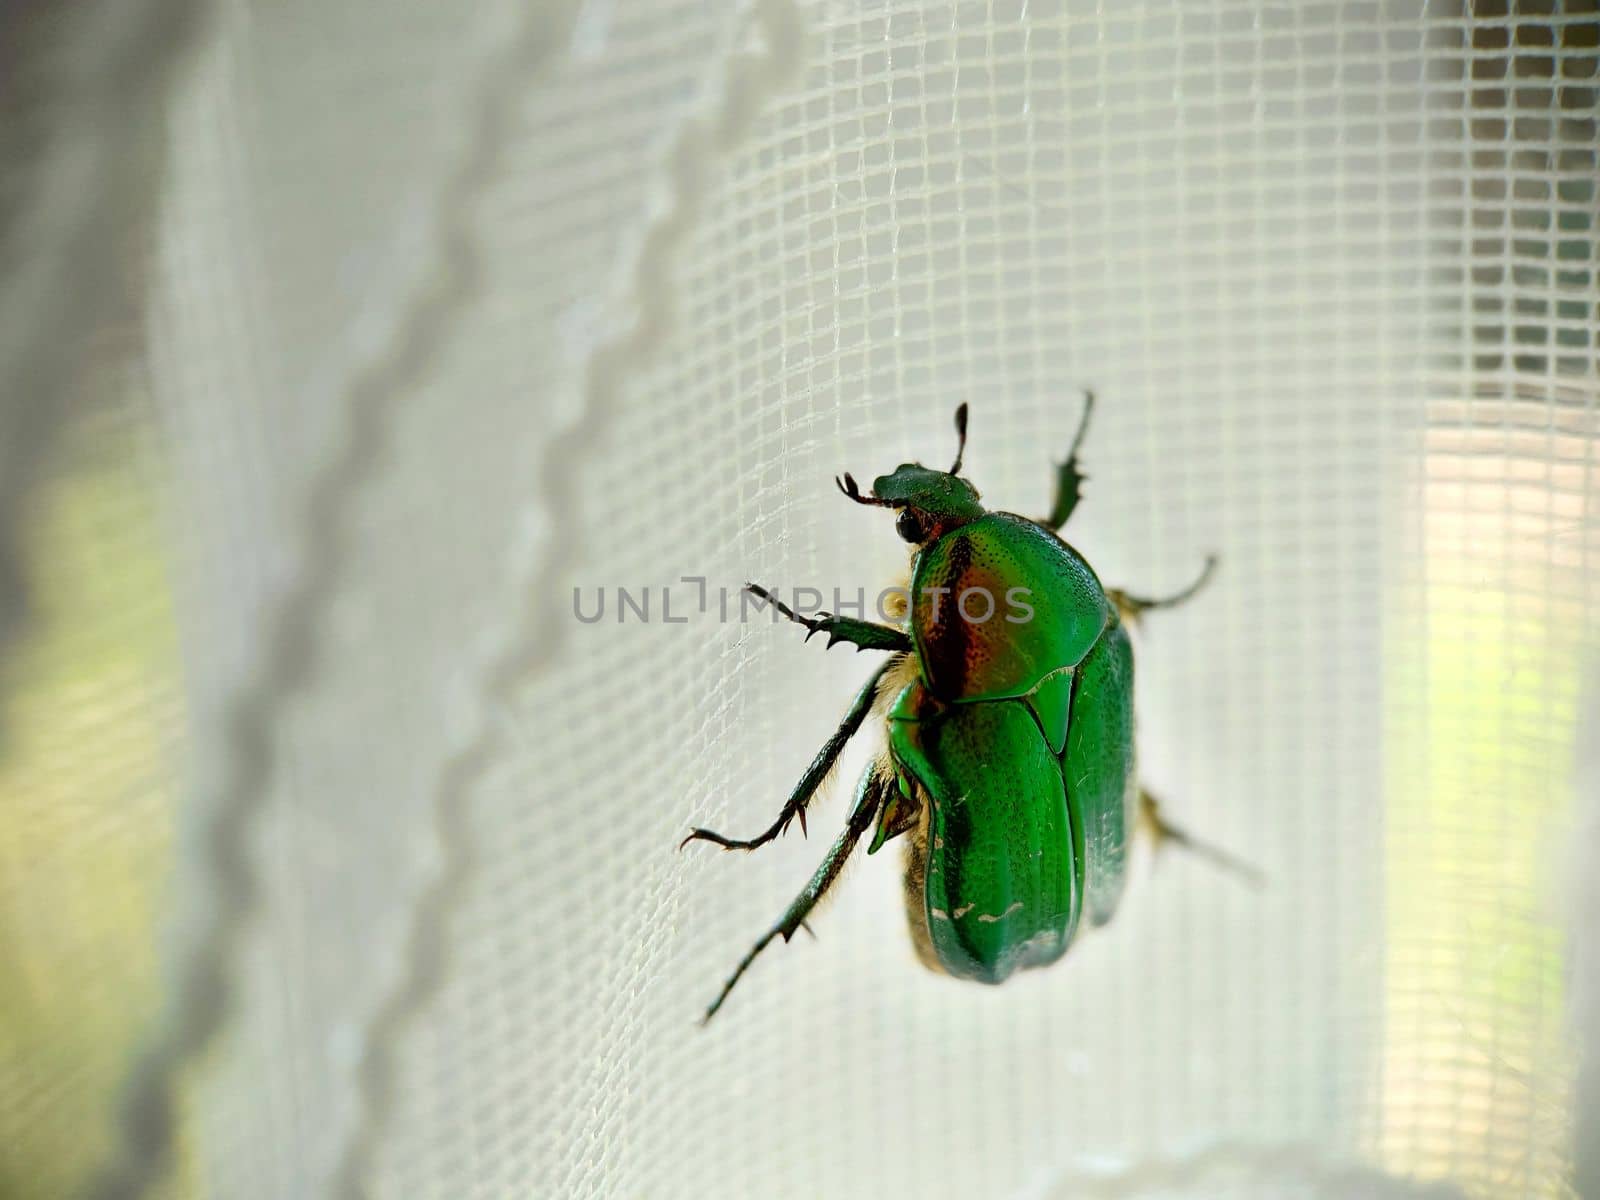 A large green beetle crawls up the lace curtains by Mastak80